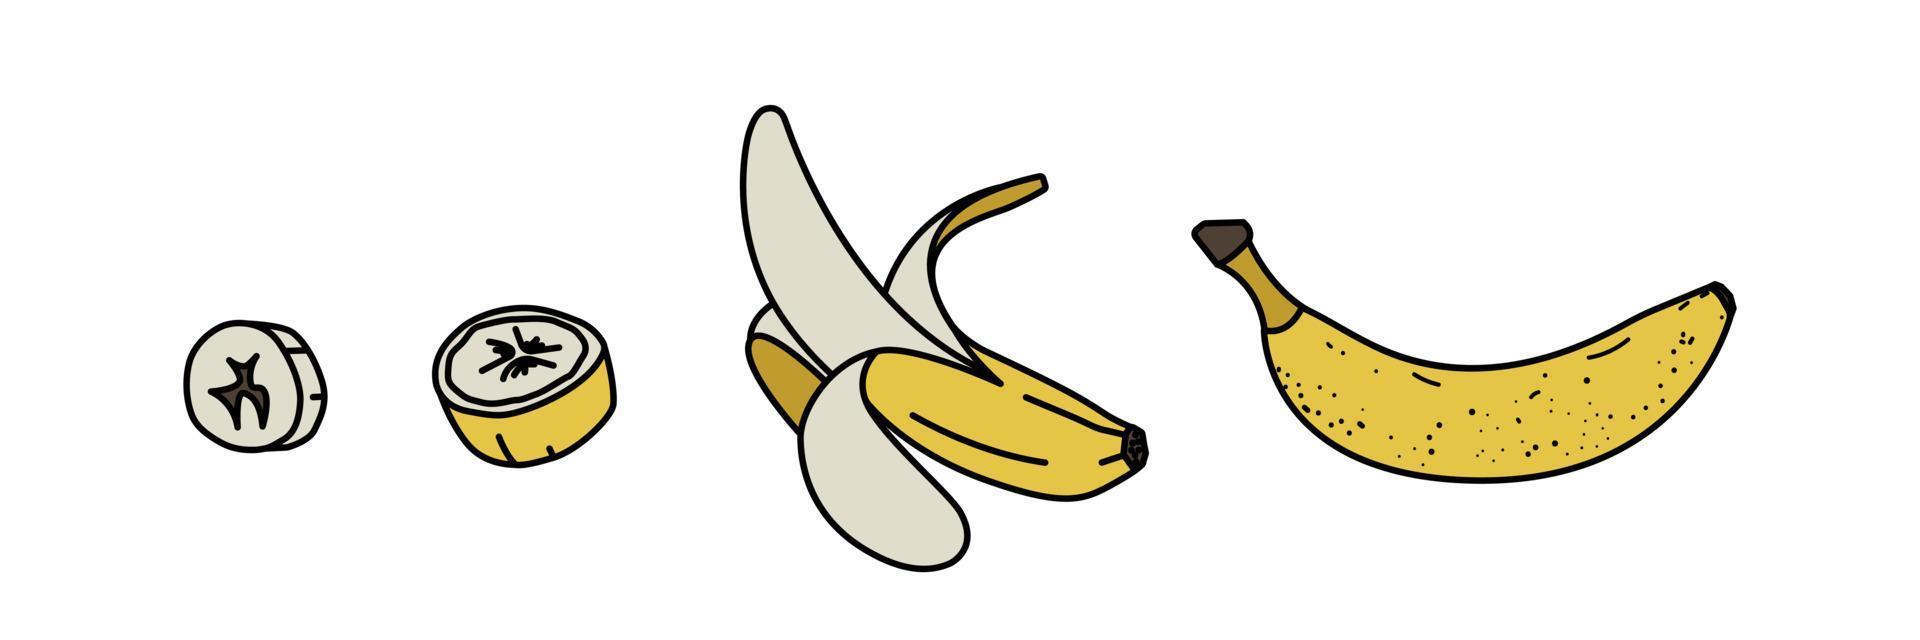 Sketch bananas set. Bunches of fruit, half peeled, open and cut banana. Flat style. Vector illustration on white background